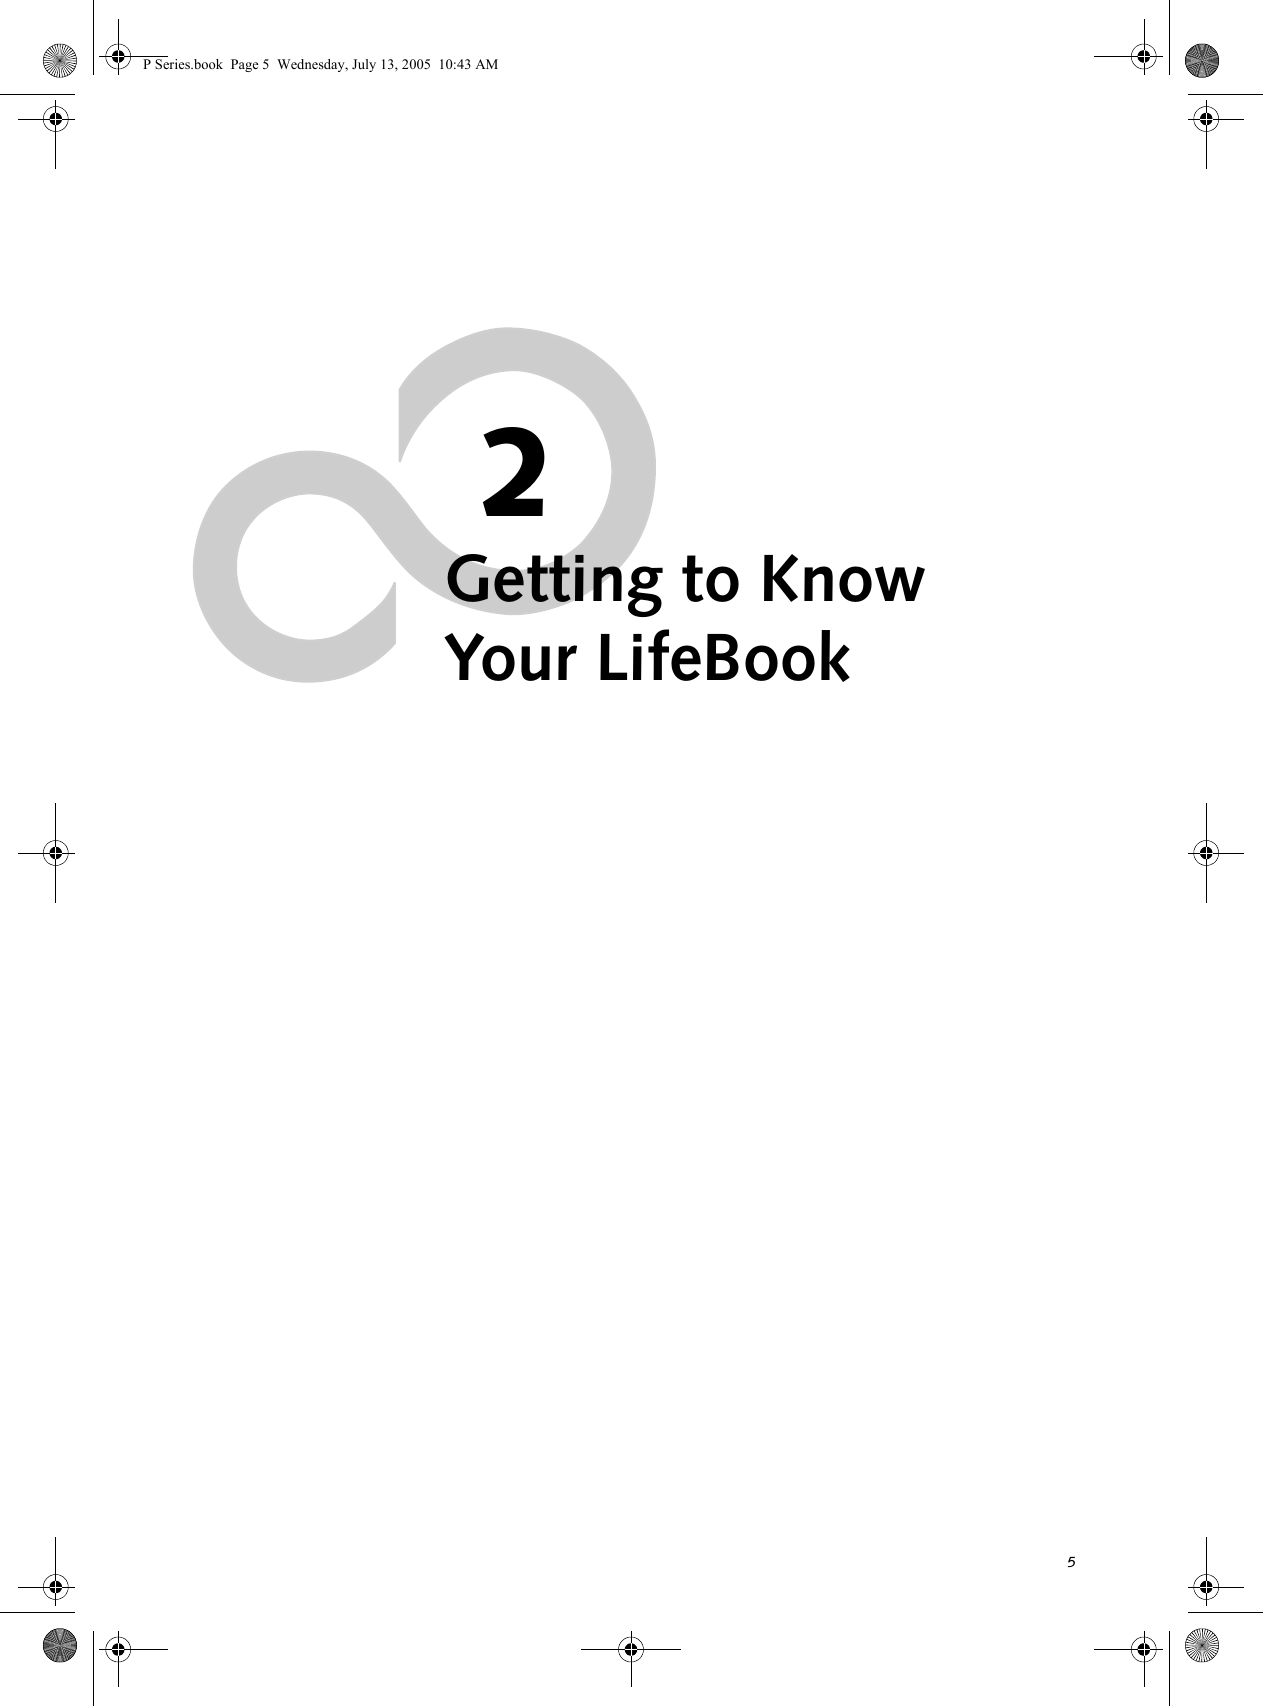 52Getting to KnowYour LifeBookP Series.book  Page 5  Wednesday, July 13, 2005  10:43 AM